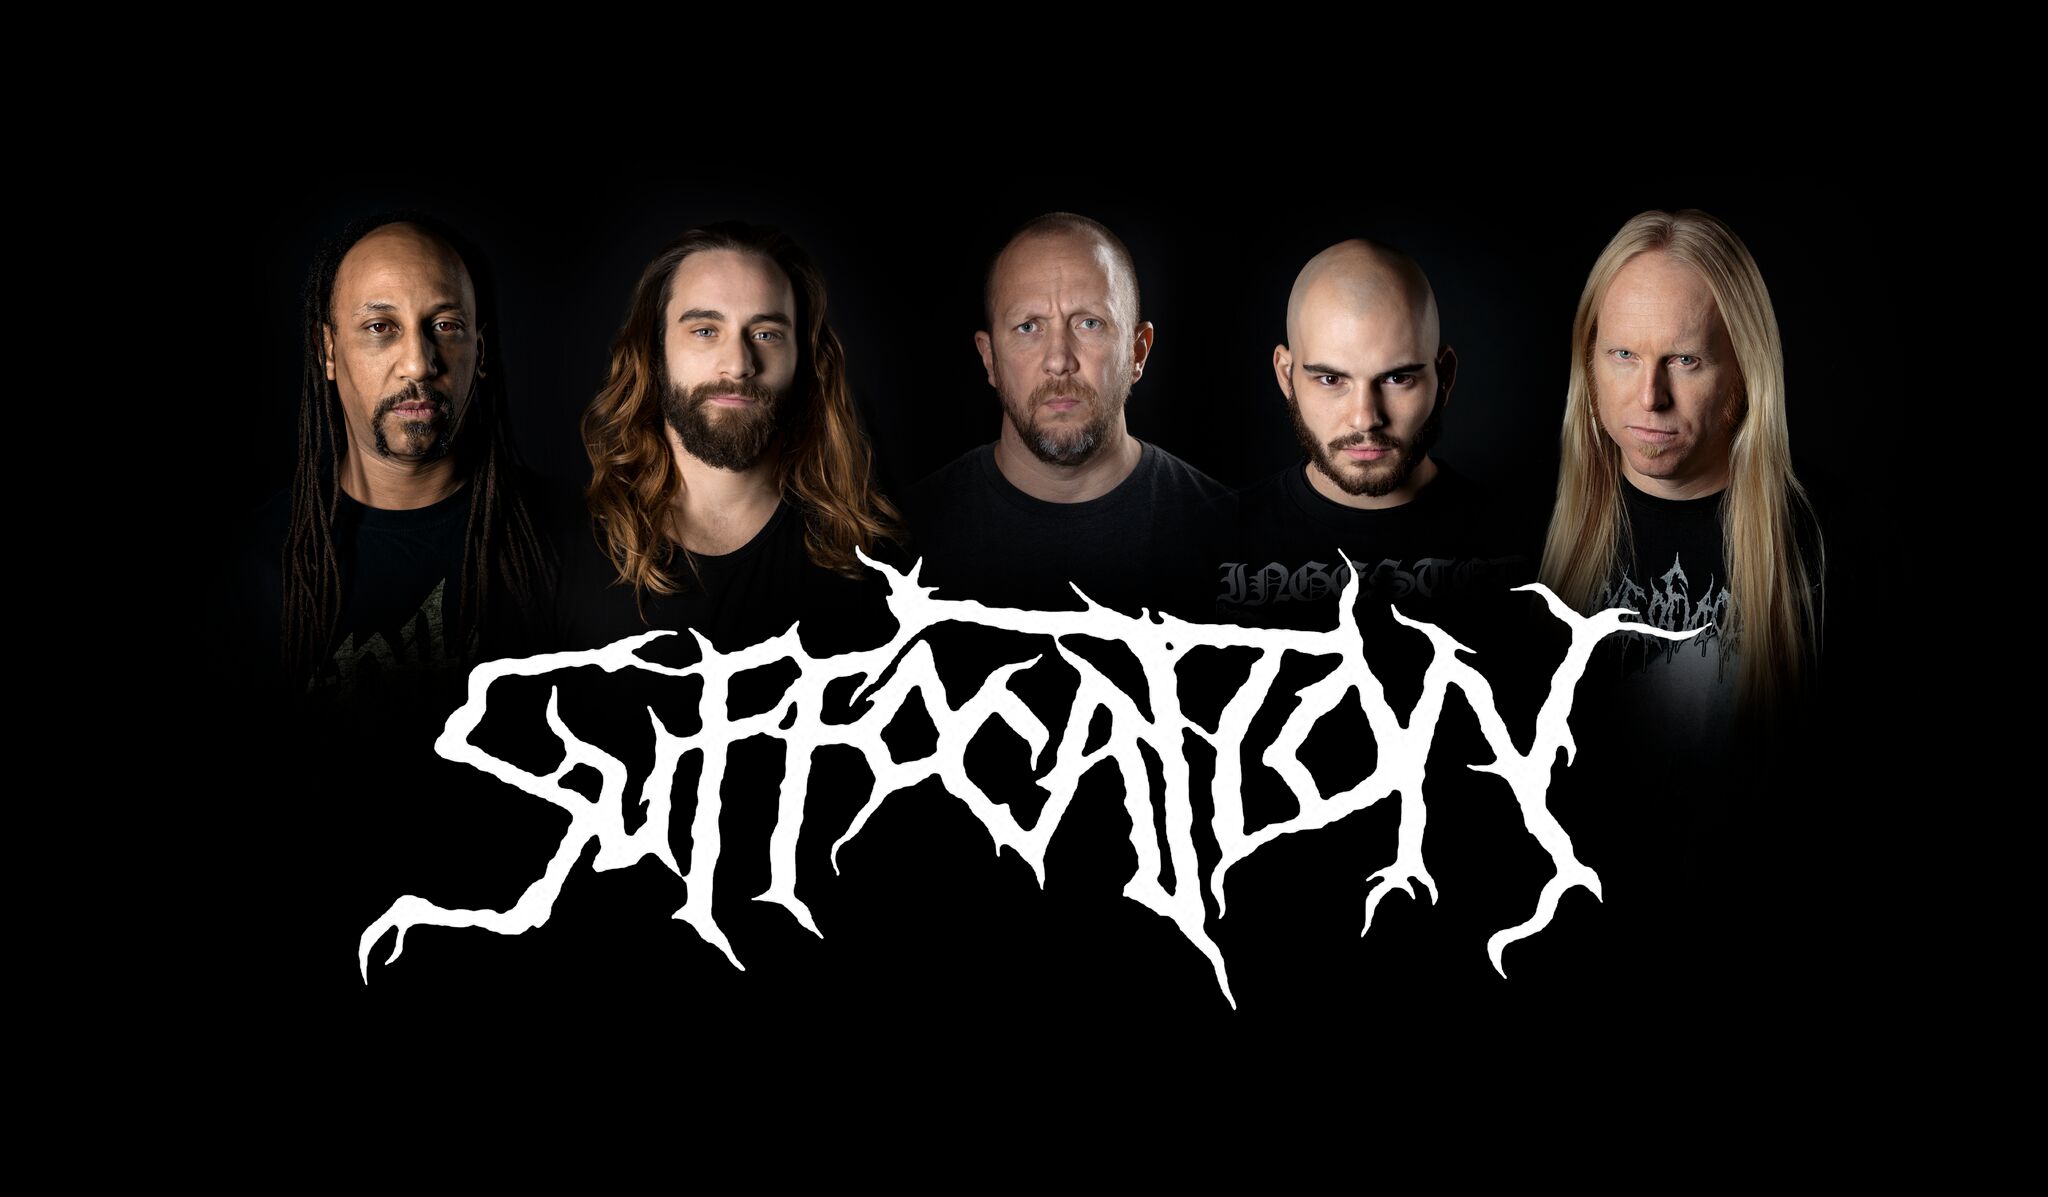 Suffocation’s Frank Mullen announces his retirement from the group